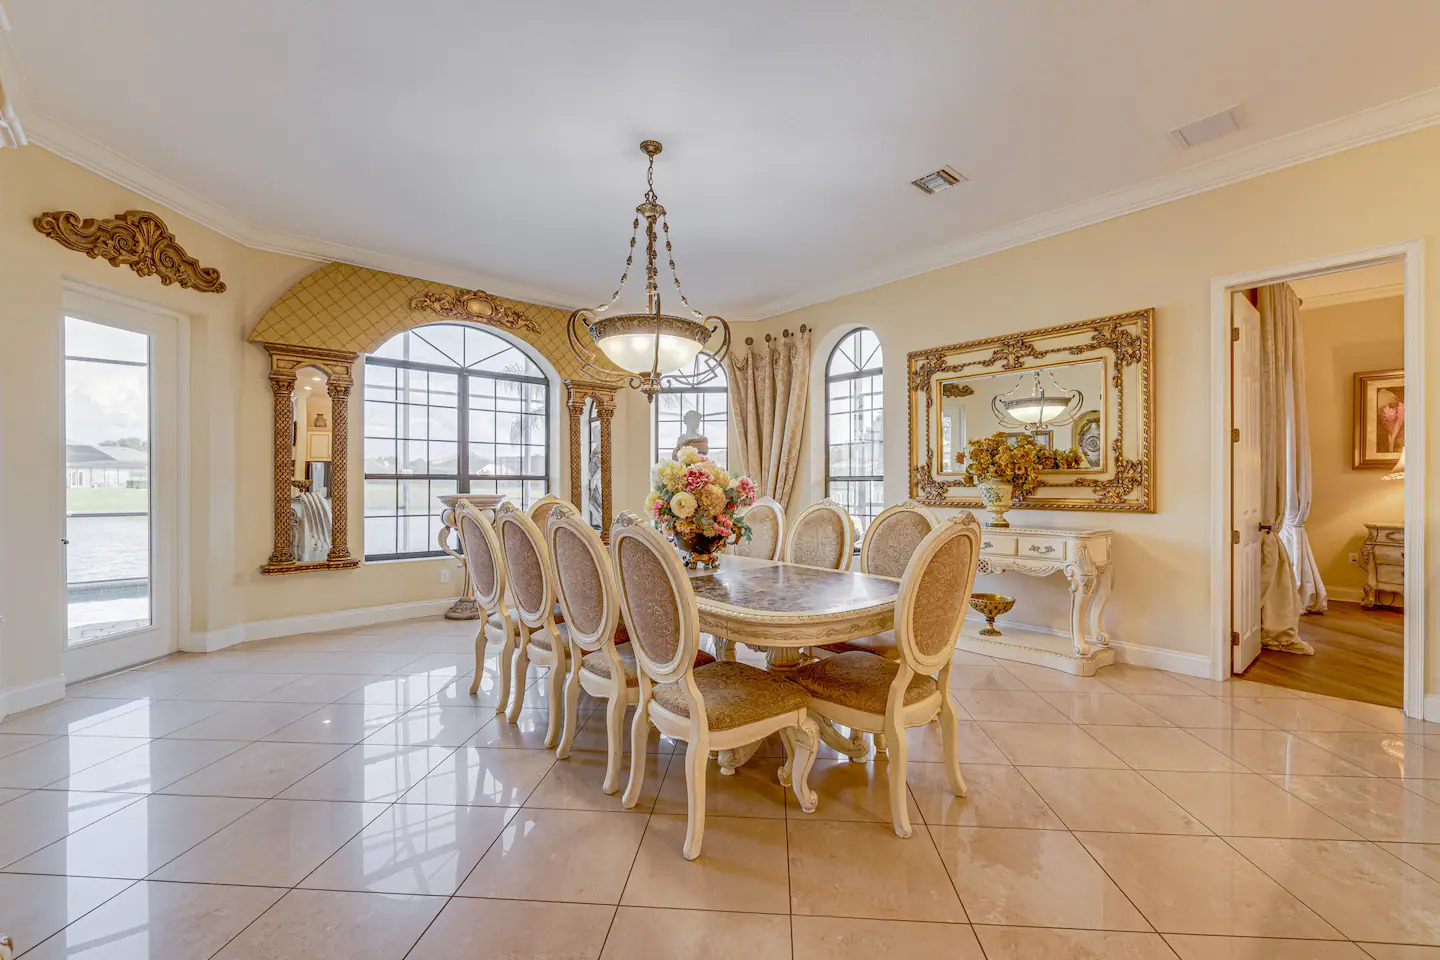 This elegant dining room is the perfect place to host a special occasion.